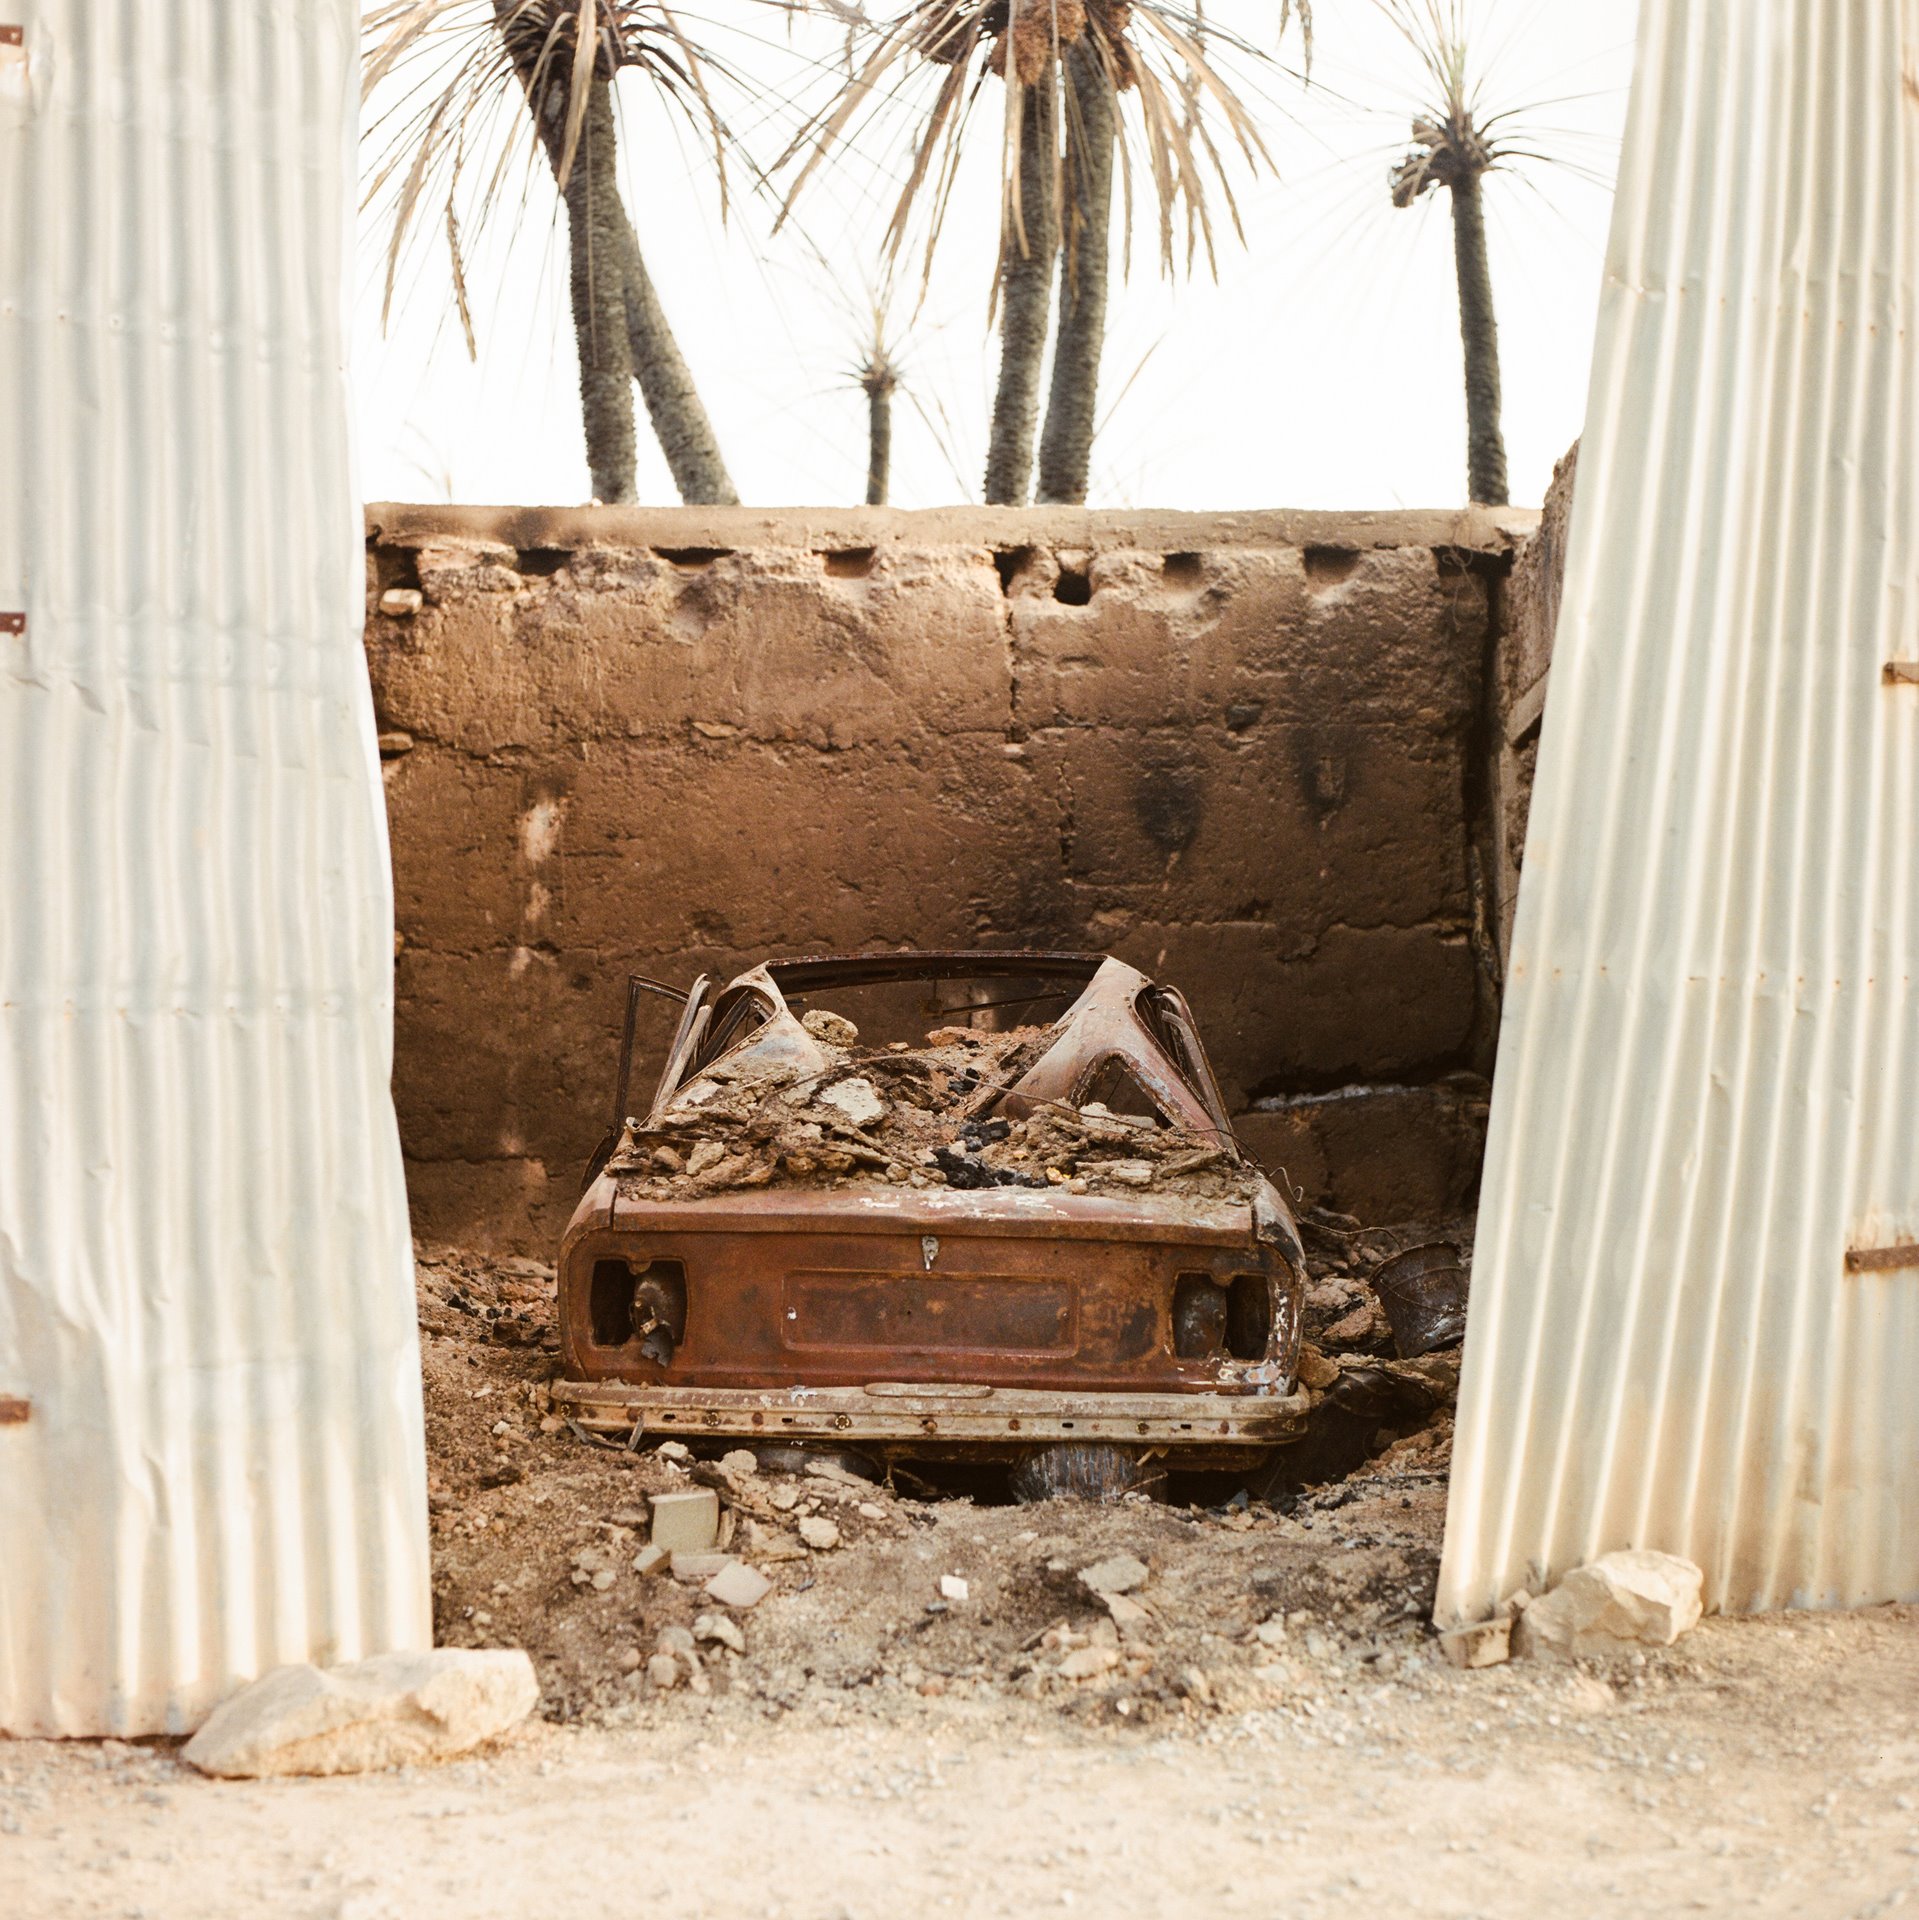 The remains of a car stand in a burnt-out house in Tighmert Oasis, in southern Morocco. A few weeks earlier, fire had burned several houses, hundreds of date palms and vegetable gardens, and killed around 400 cattle. The blaze burned from midday until around 8pm, and was one of many suffered in the region in August 2020.&nbsp;